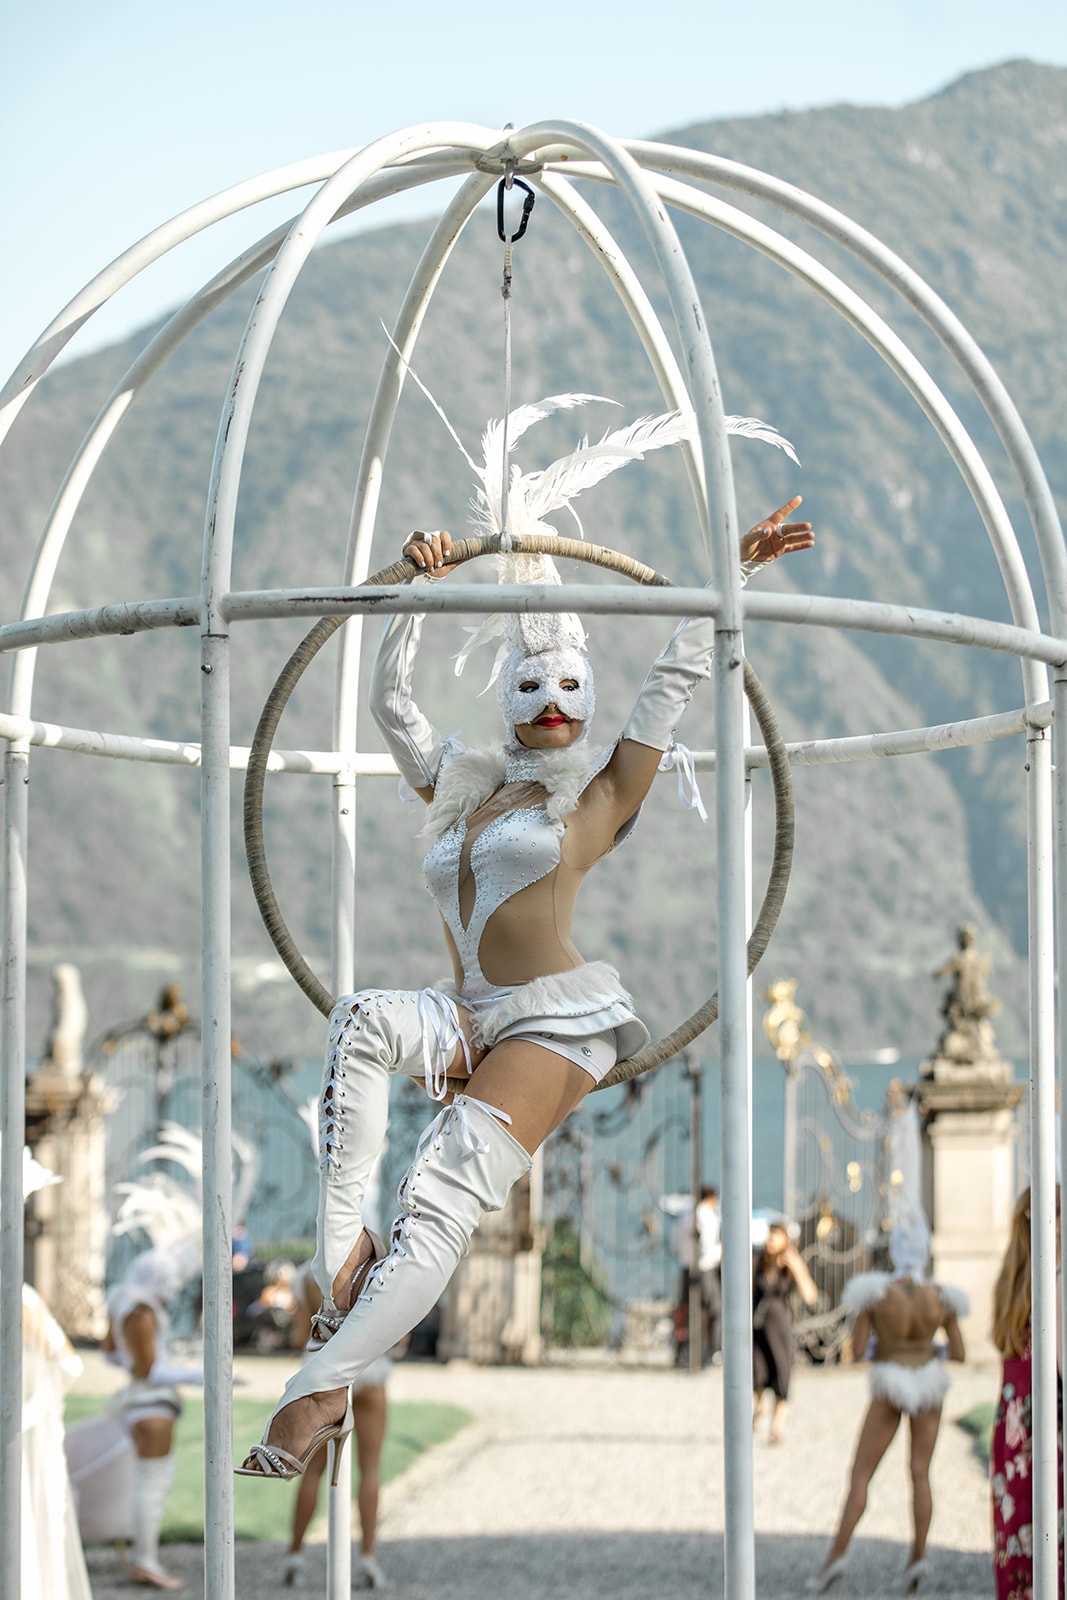 Performer in an iron cage performs for proposal party